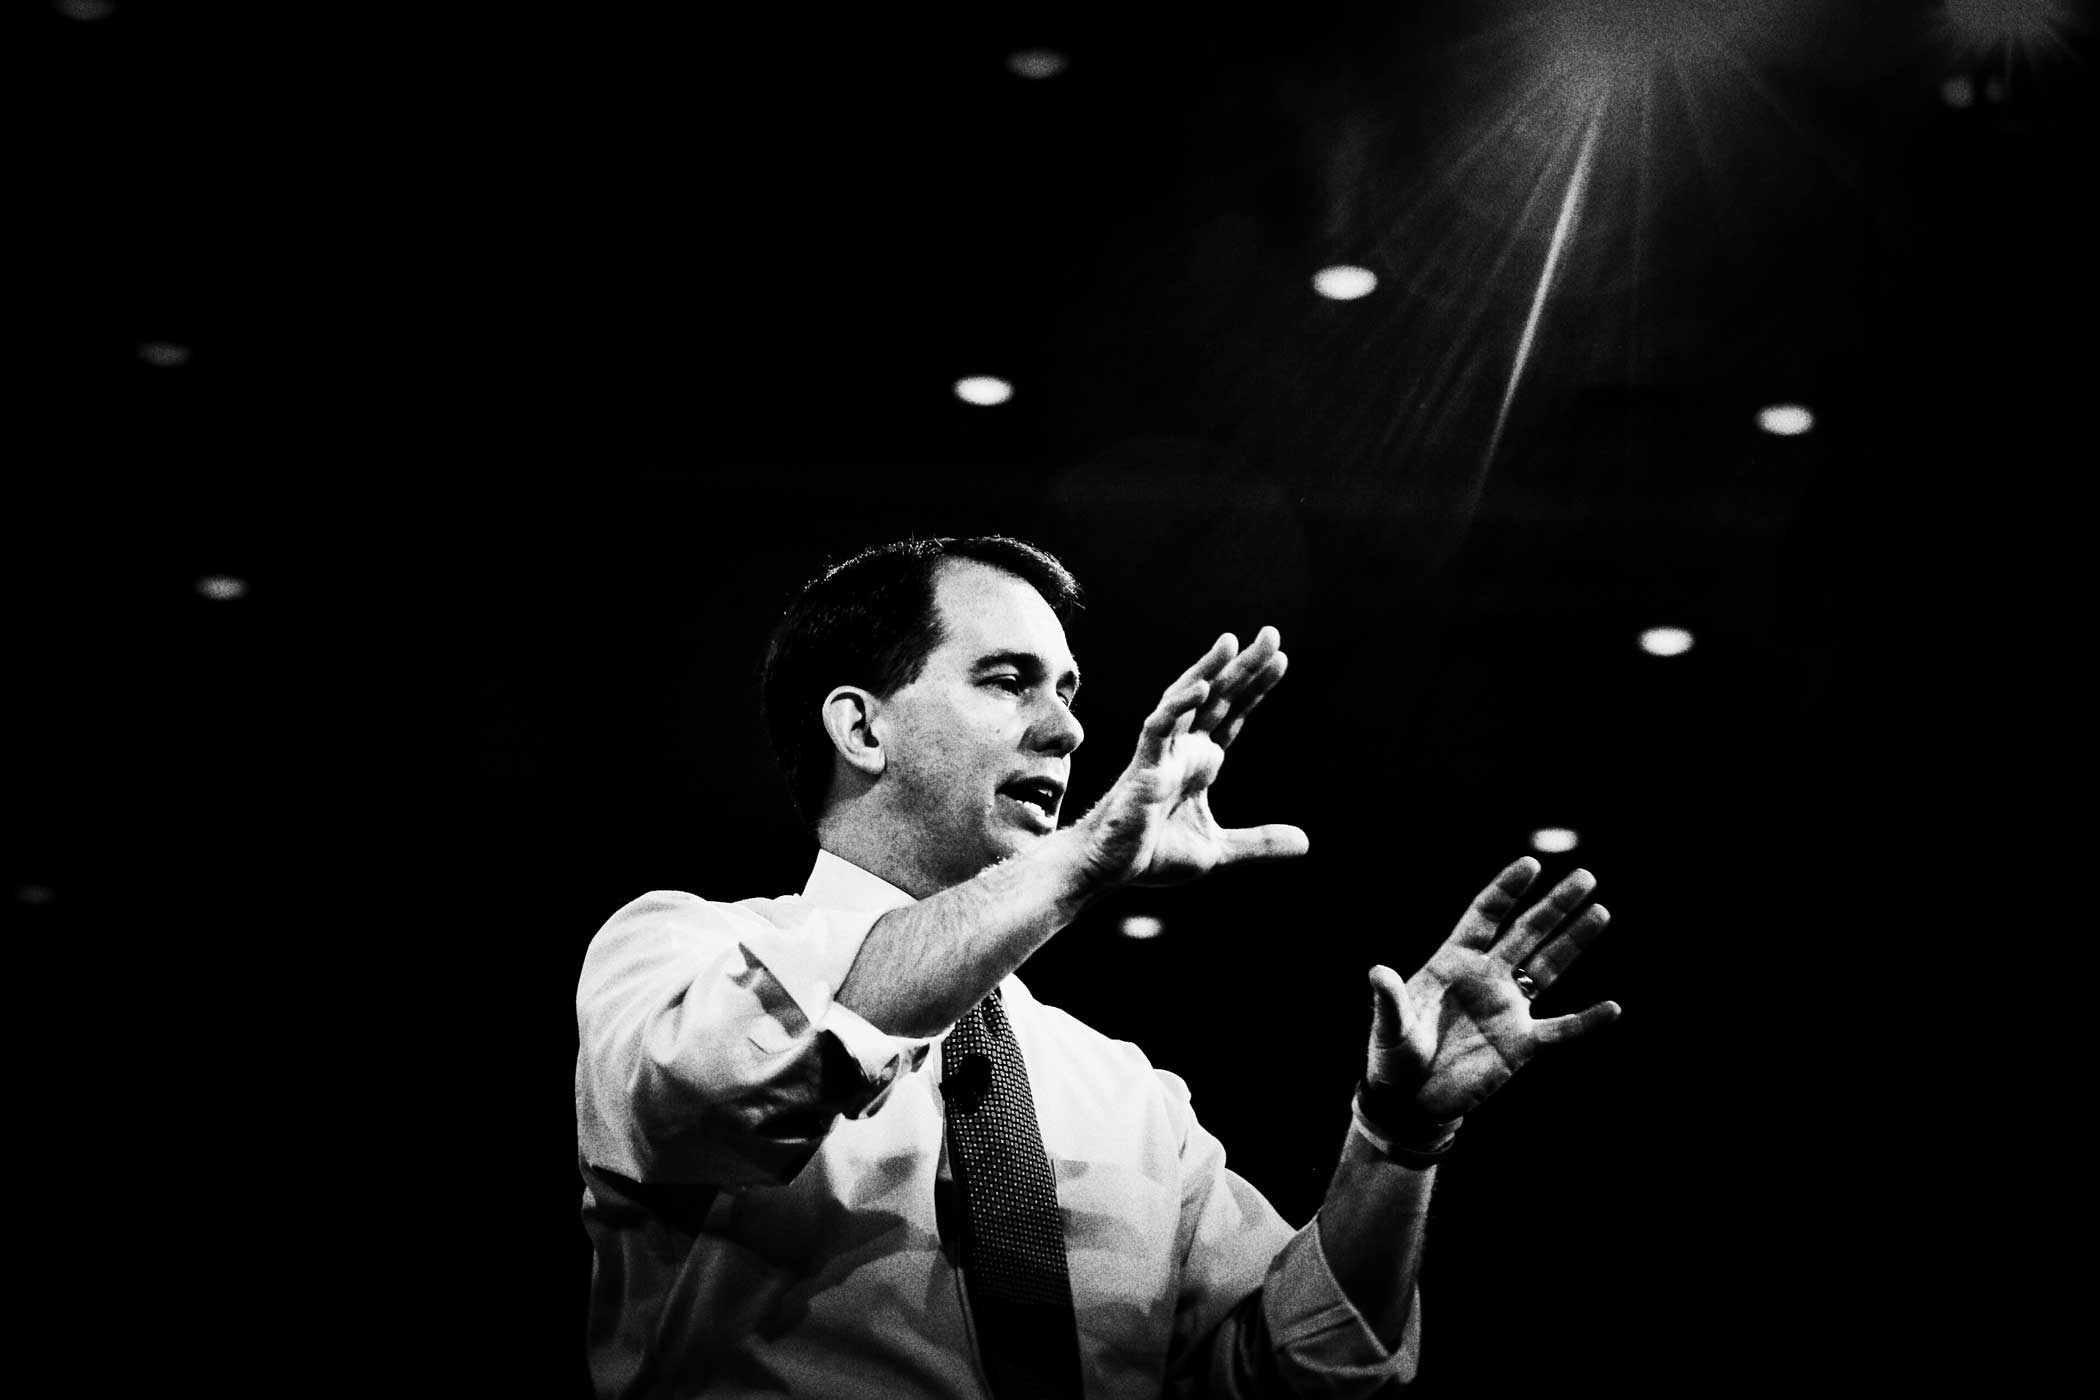 Wisconsin Governor Scott Walker at the 42nd annual Conservative Political Action Conference (CPAC) at National Harbor, MD on Feb. 26, 2015. (Mark Peterson—Redux for TIME)